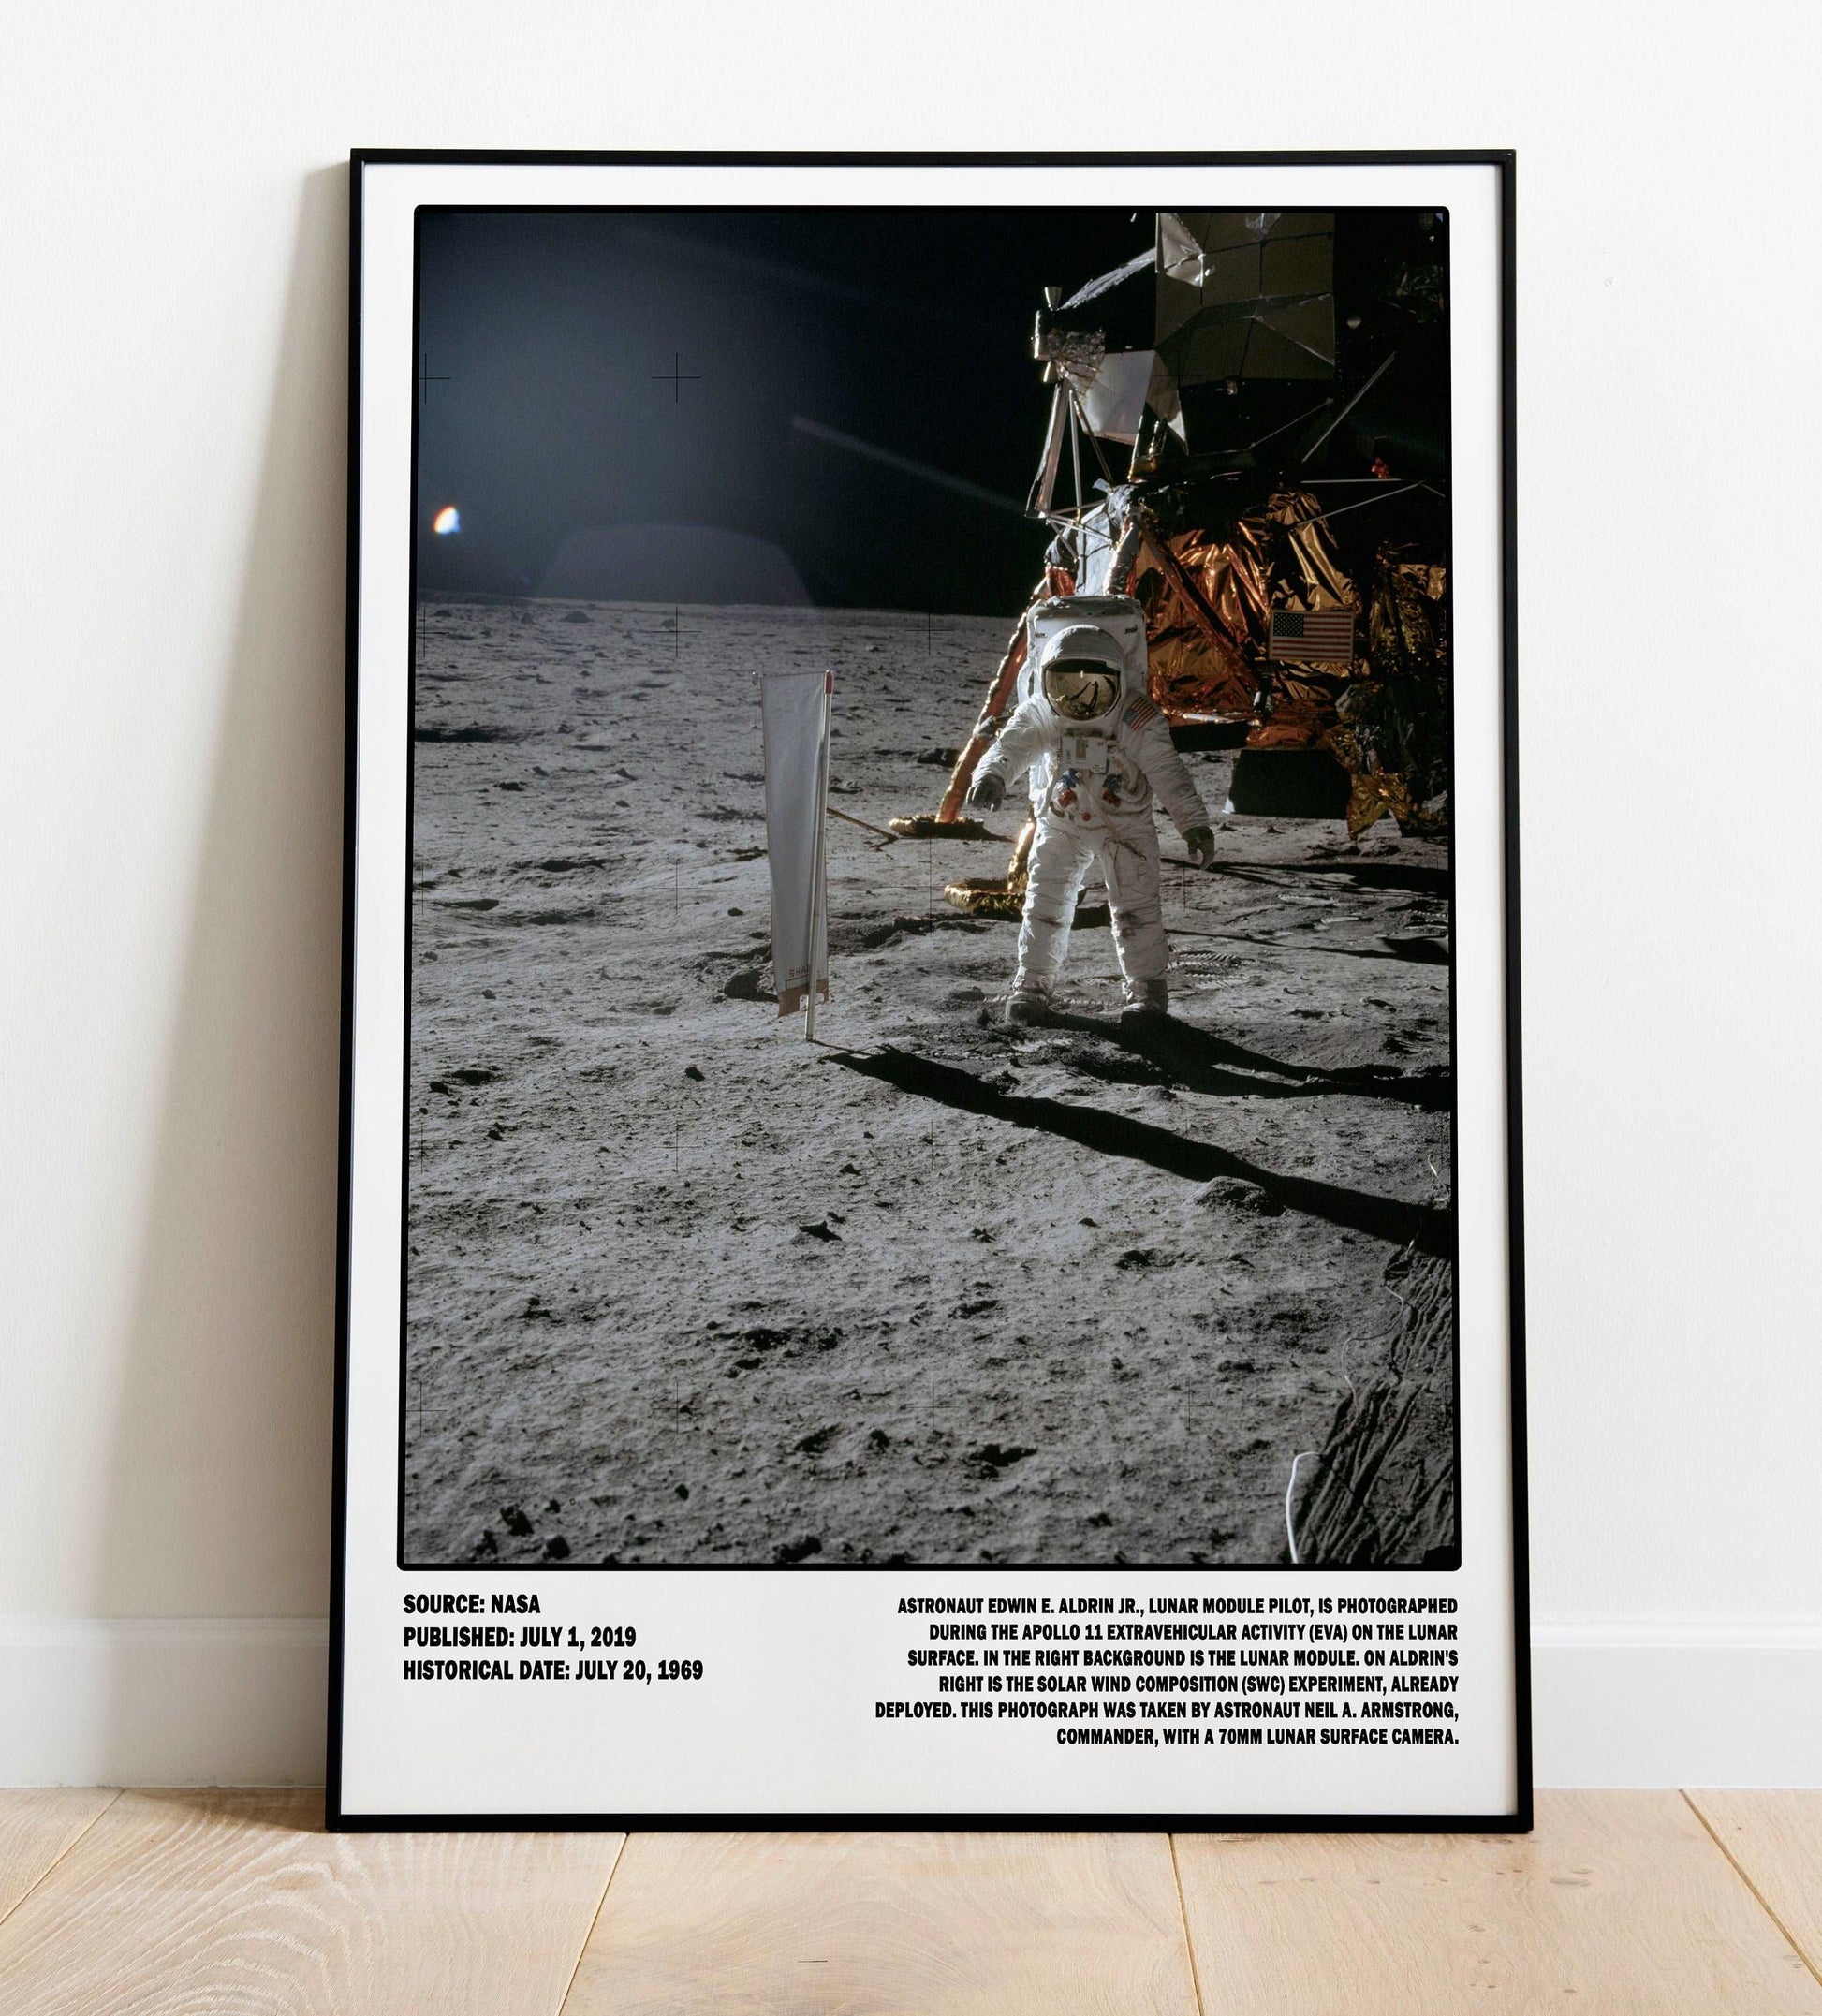 Moon Buzz aldrin posters - Poster Kingz